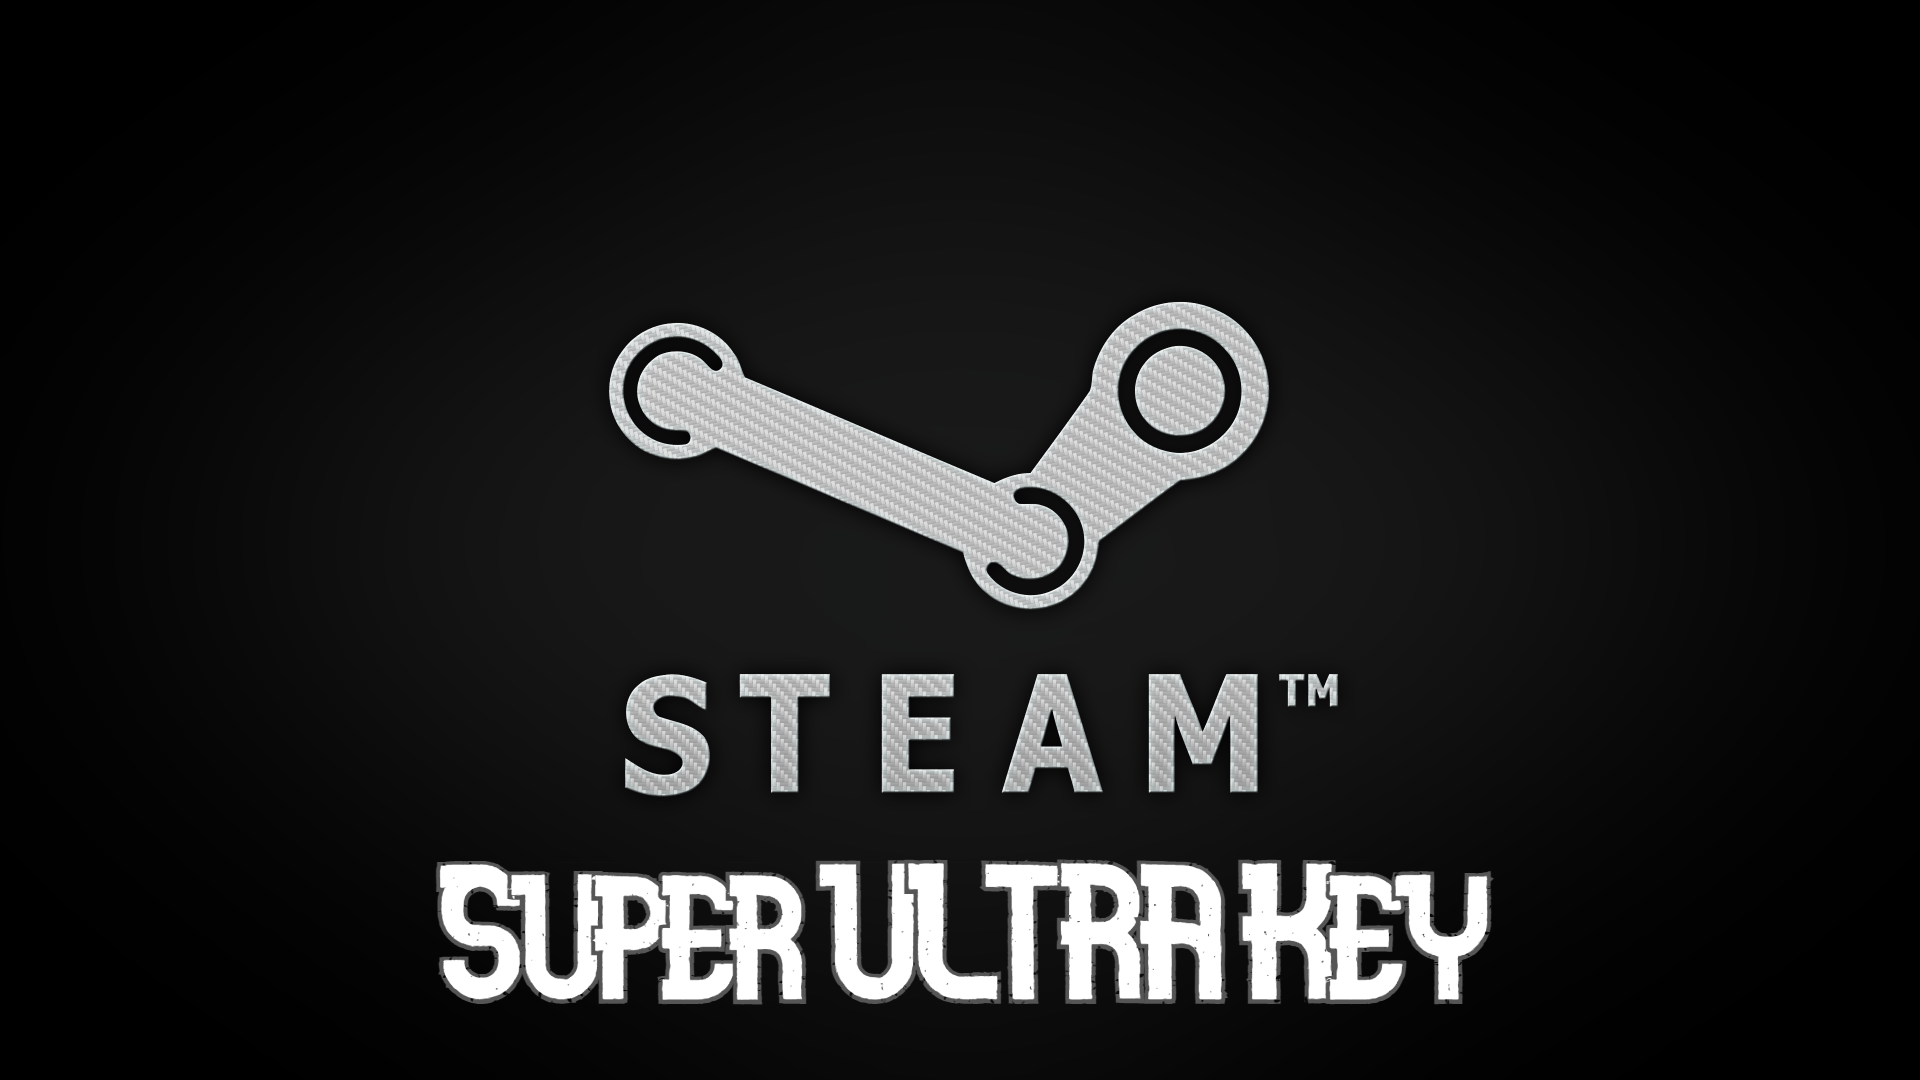 Sell and buy steam accounts фото 51